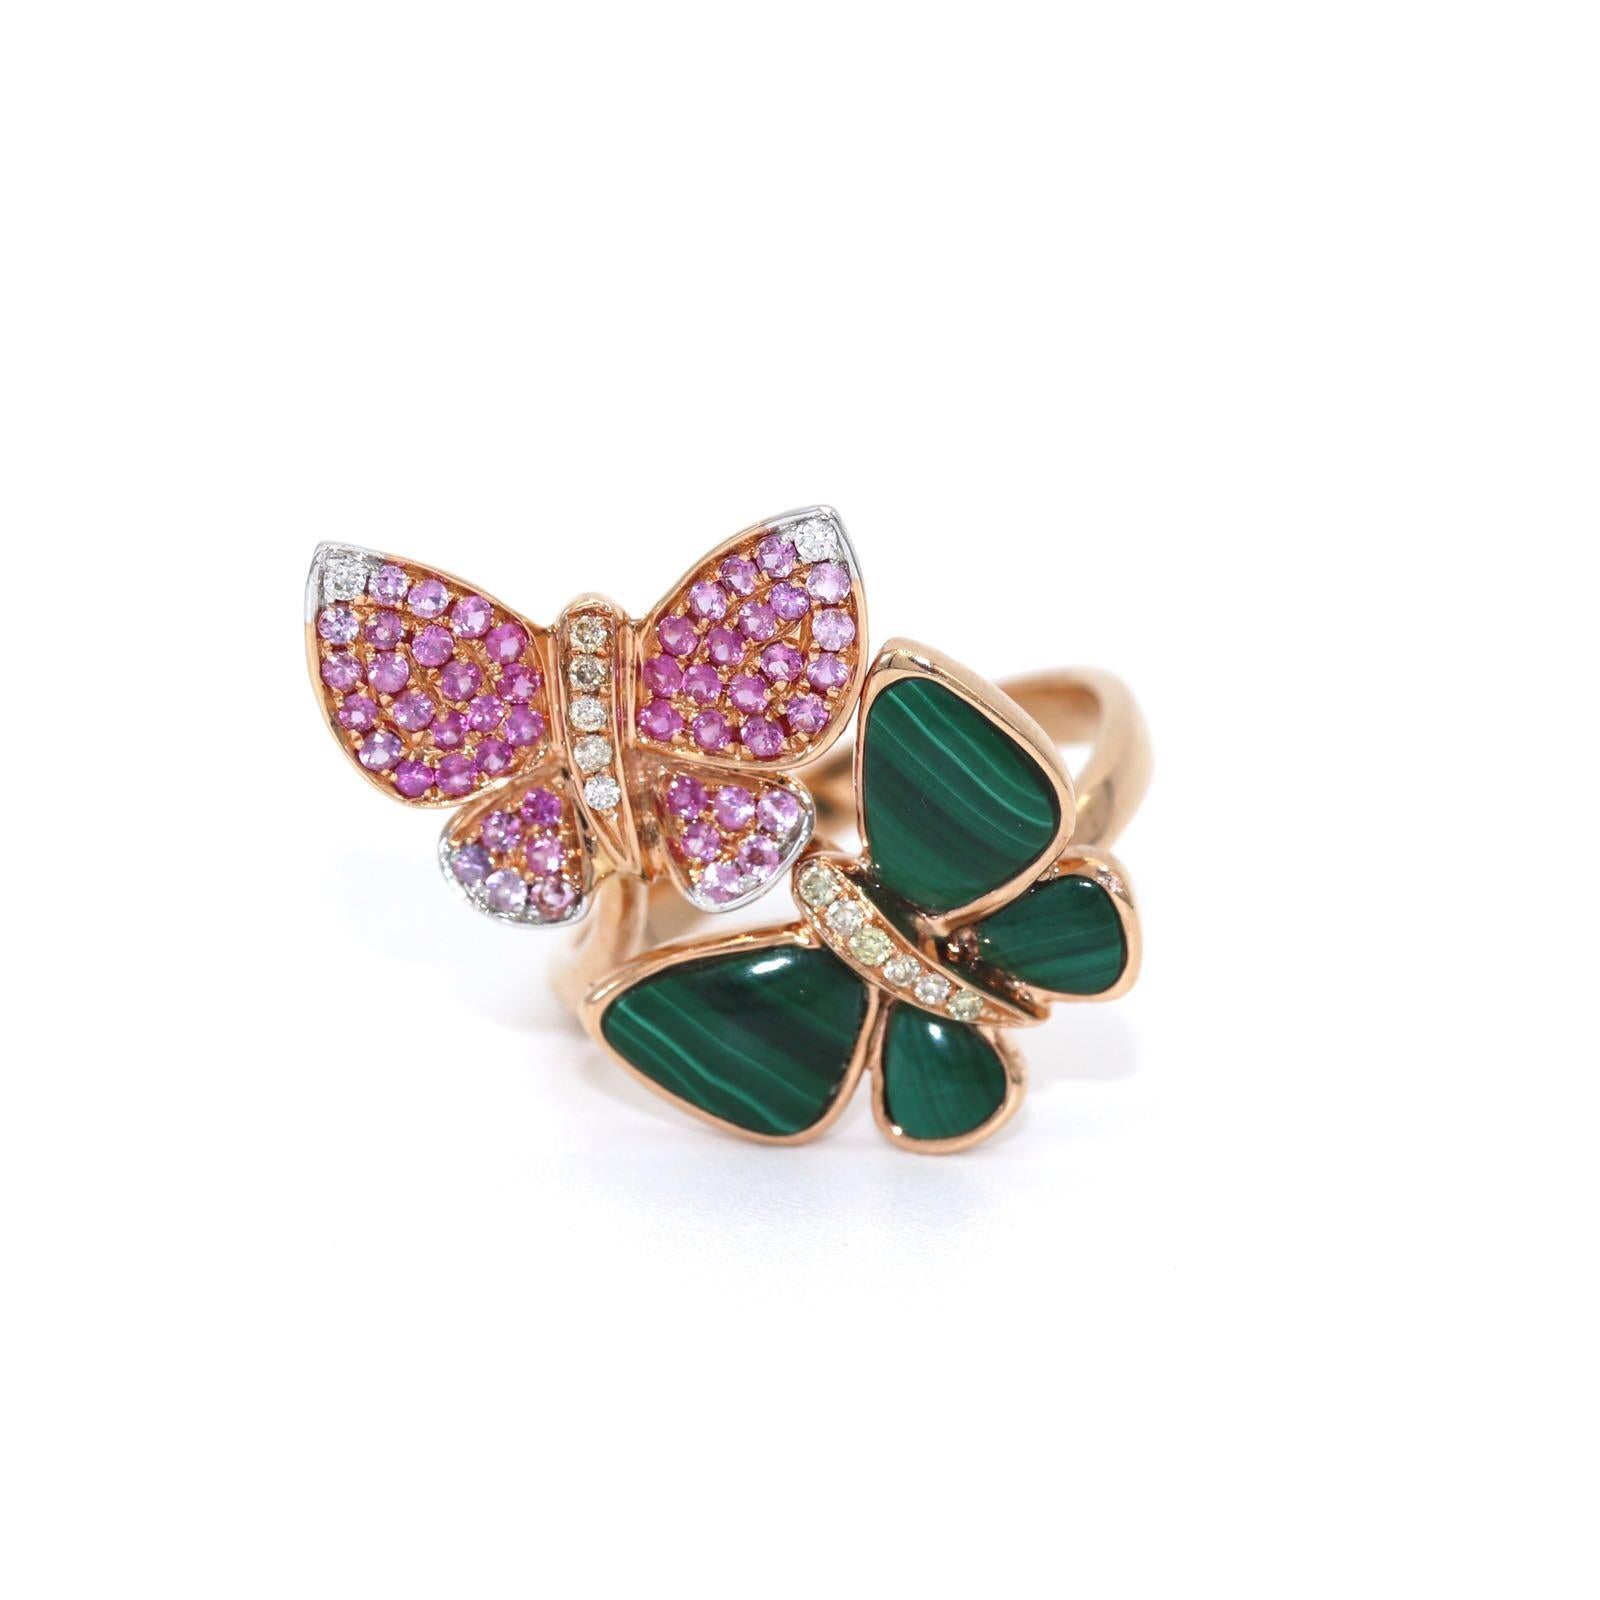 18K Multi Colored Butterfly Ring with Gemstones & Diamonds.

Size 6.5 (Can be ordered in any size, Message us for more info)